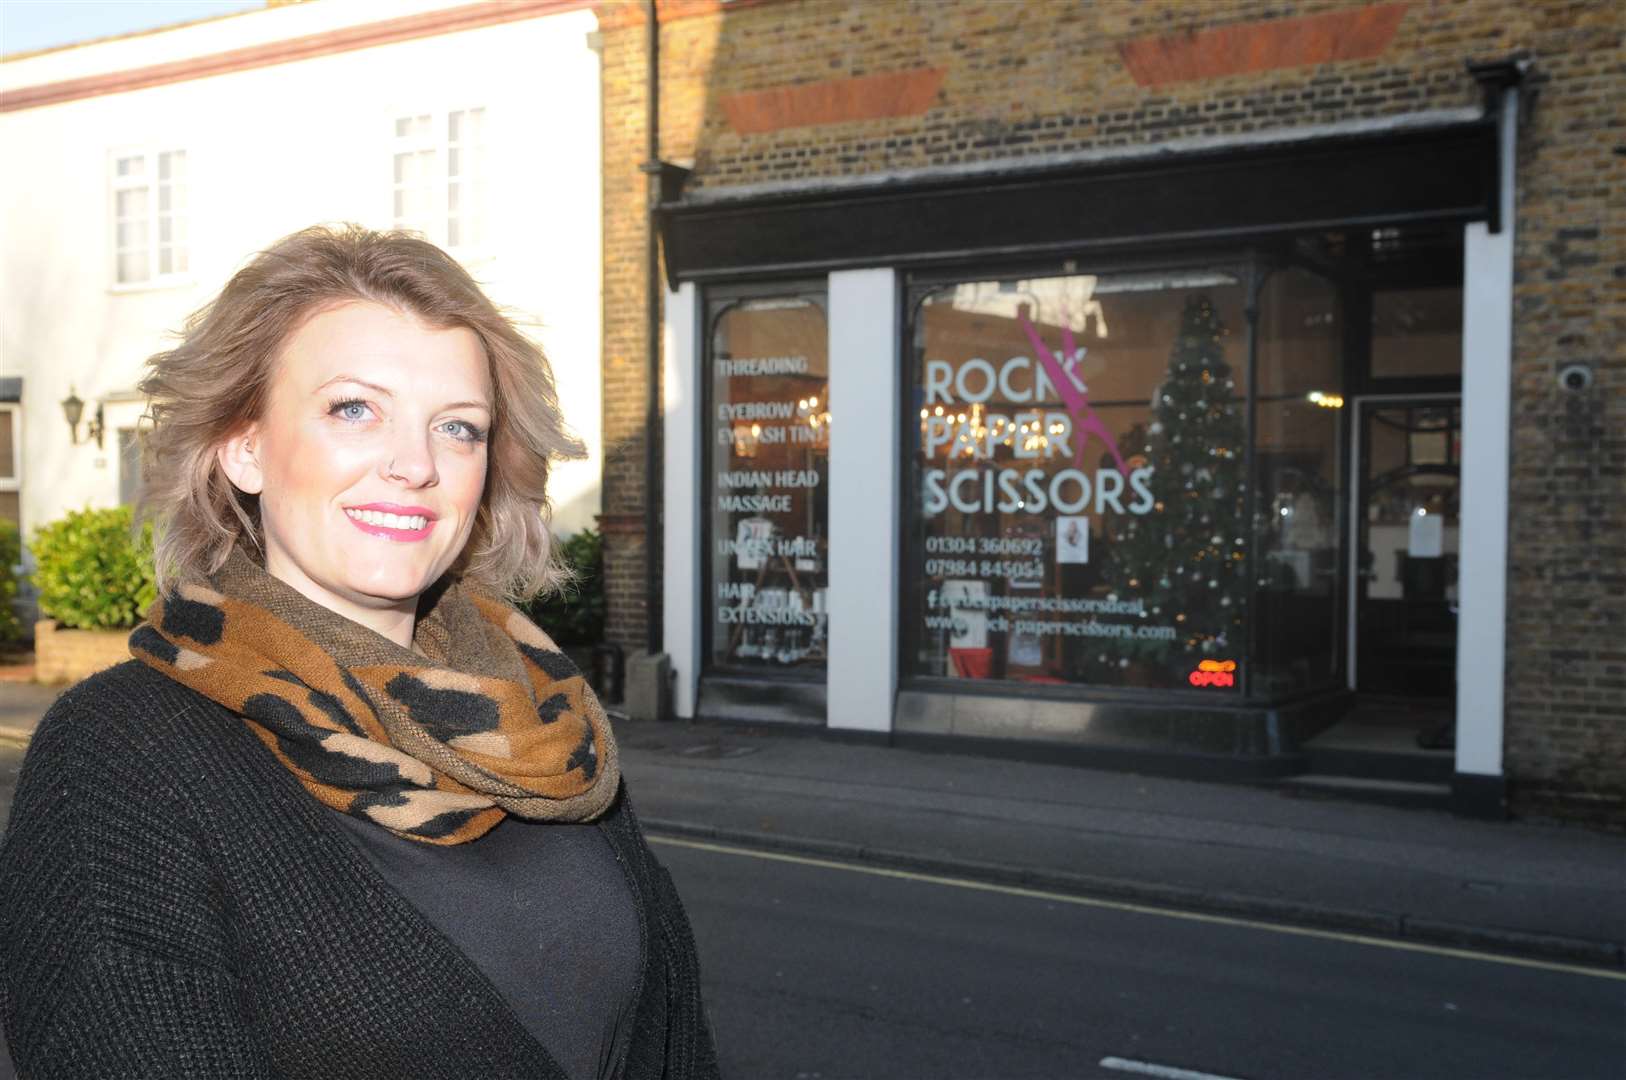 Carla Goodburn-Baker at the new salon Rock Paper Scissors which has been awarded 4 stars by the Good Salon Guide